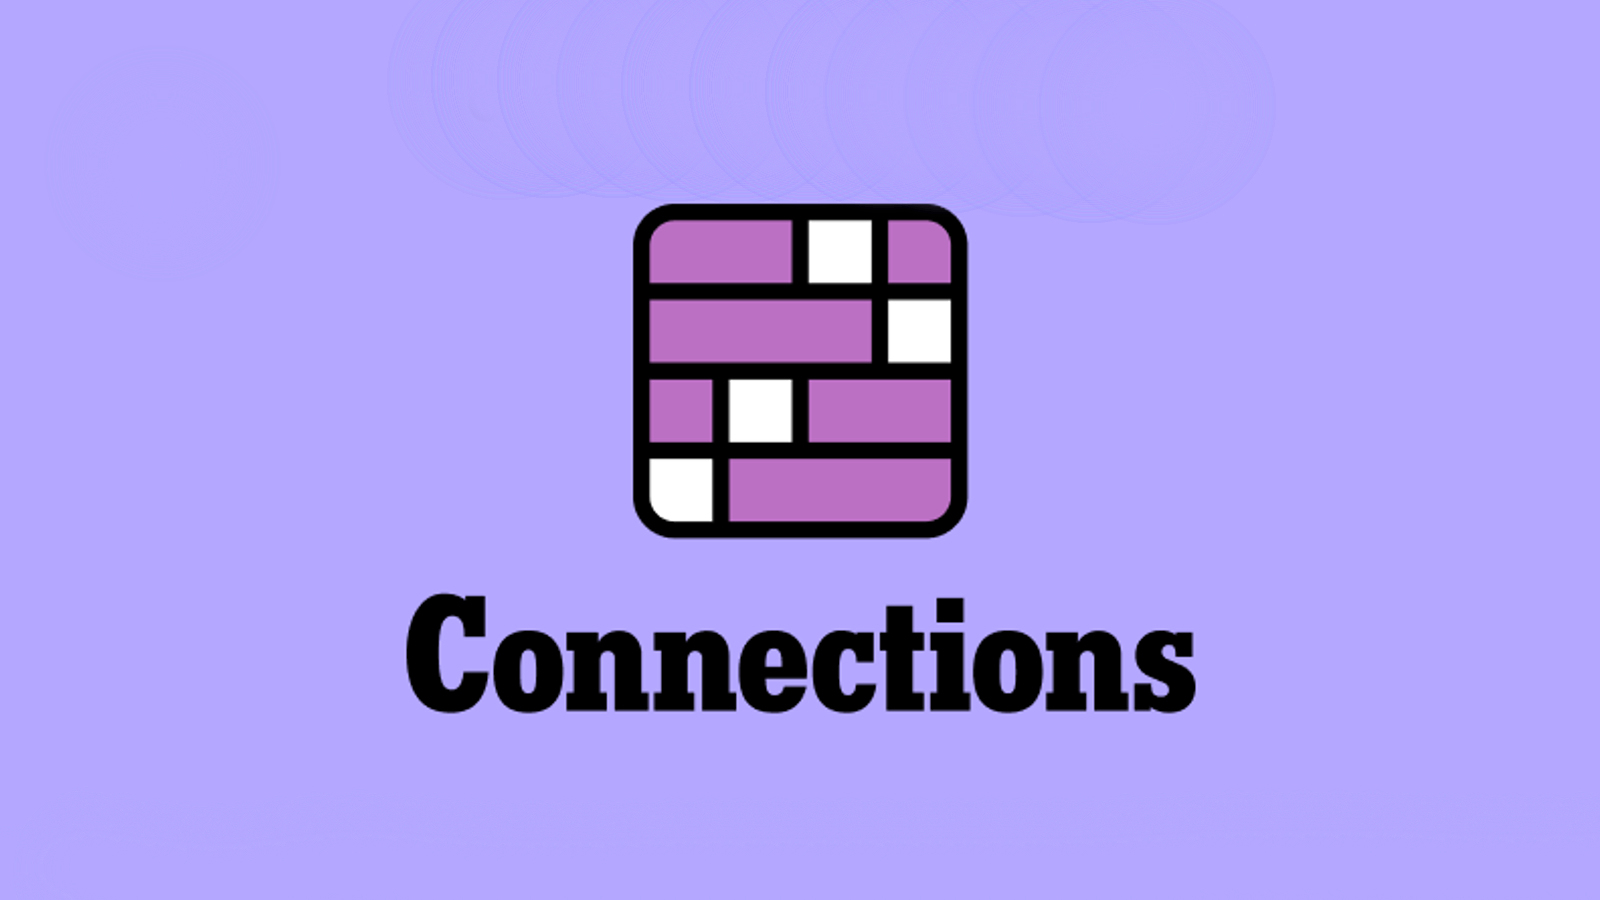 Connections answer